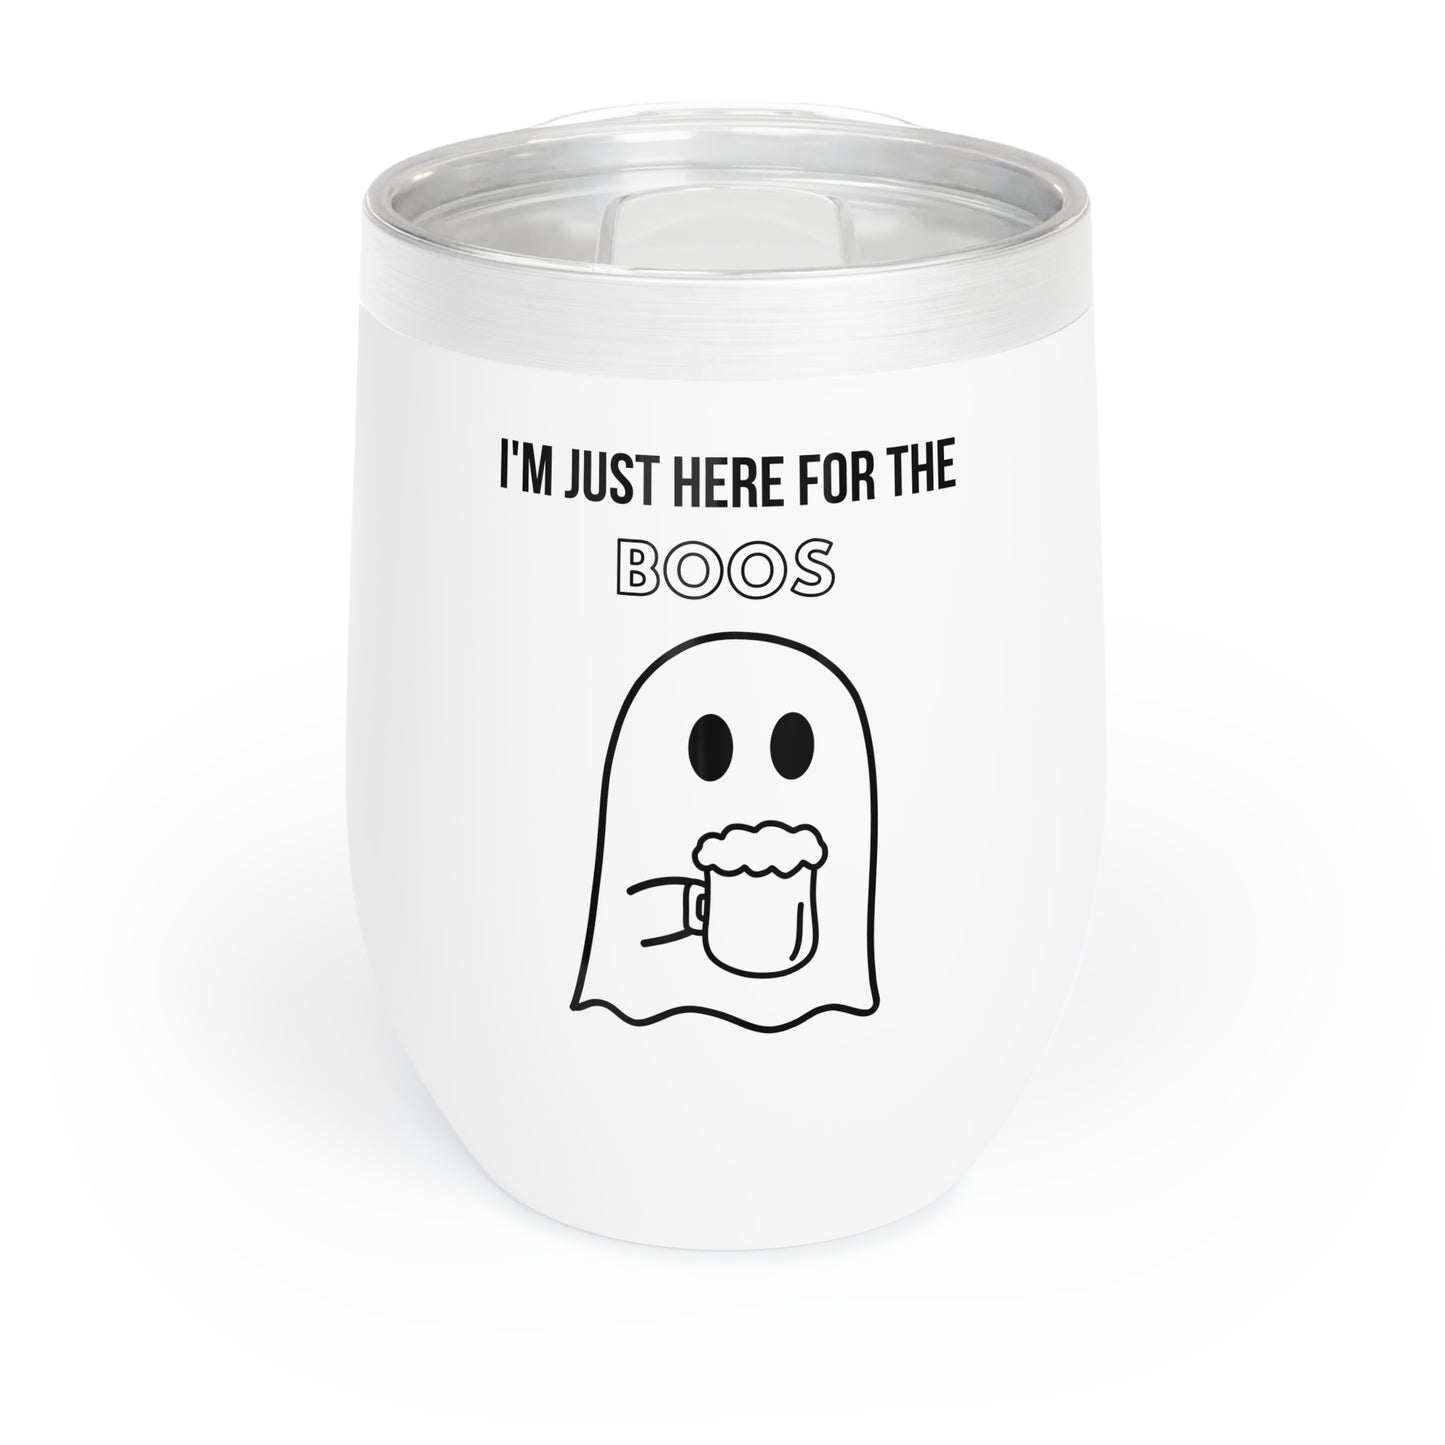 Here for the Boos - Wine Tumbler